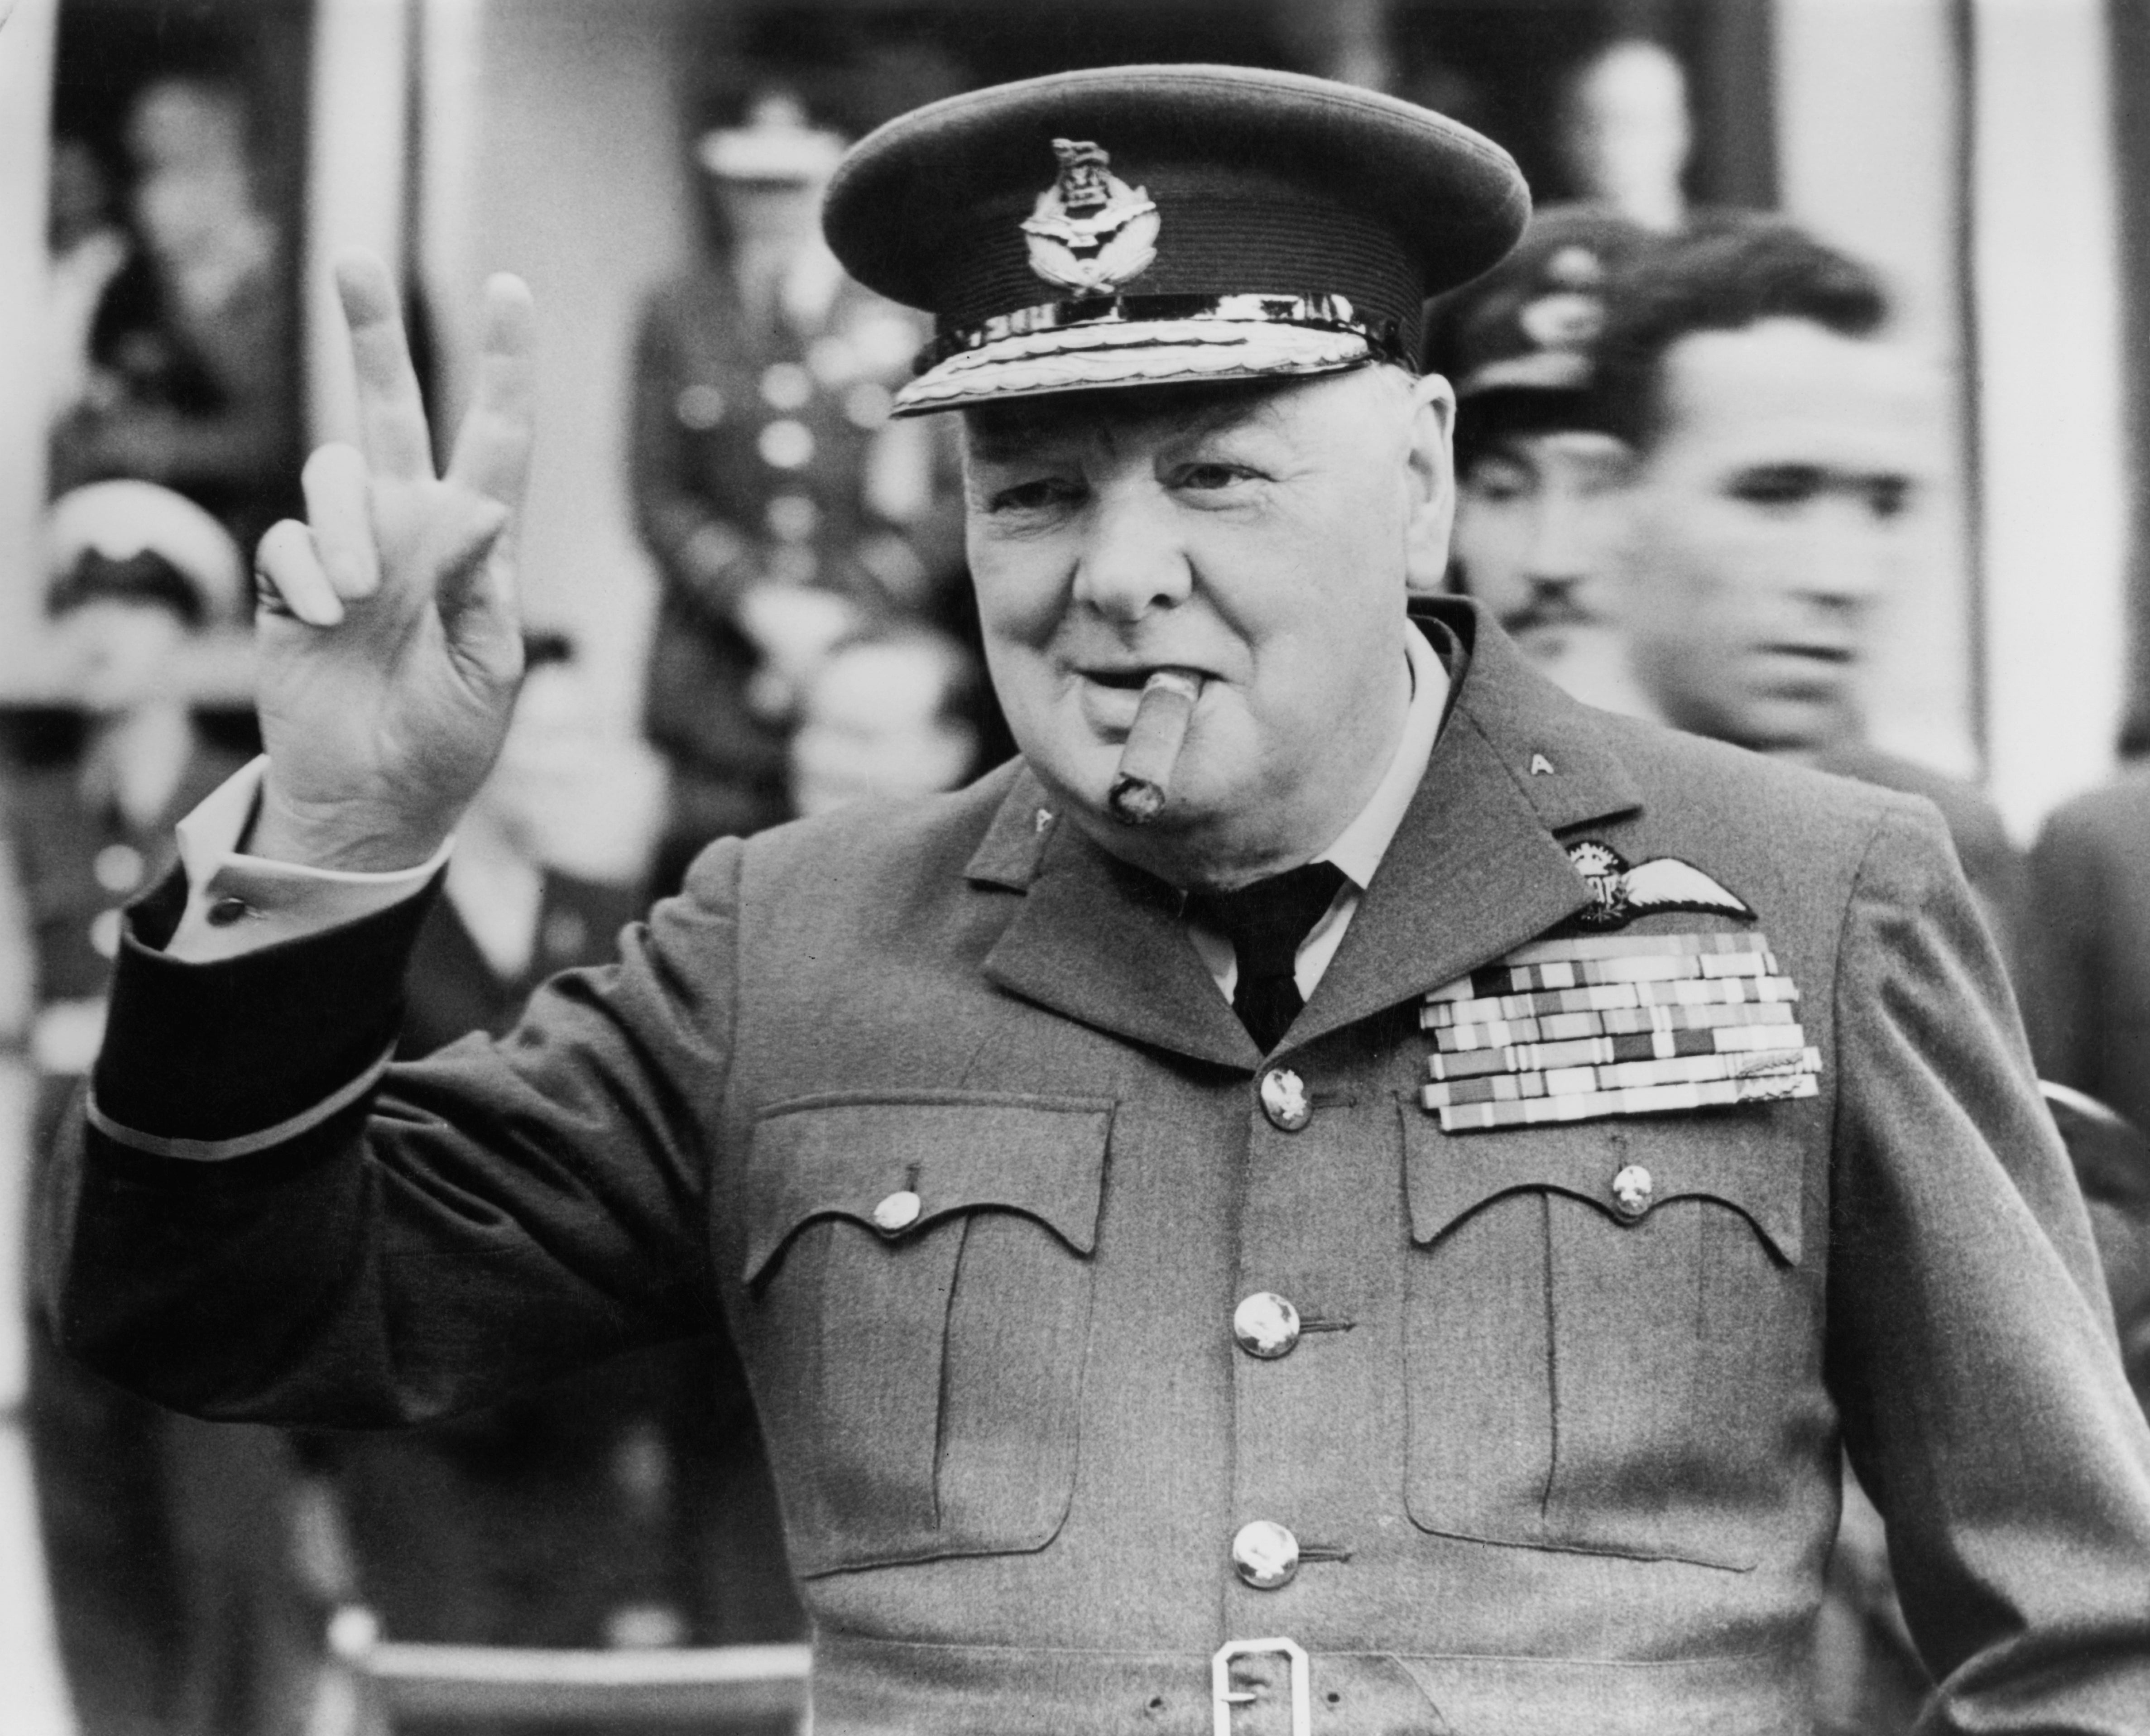 ‘Americans can always be trusted to do the right thing, once all other possibilities have been exhausted,’ is a quote often attributed to Winston Churchill